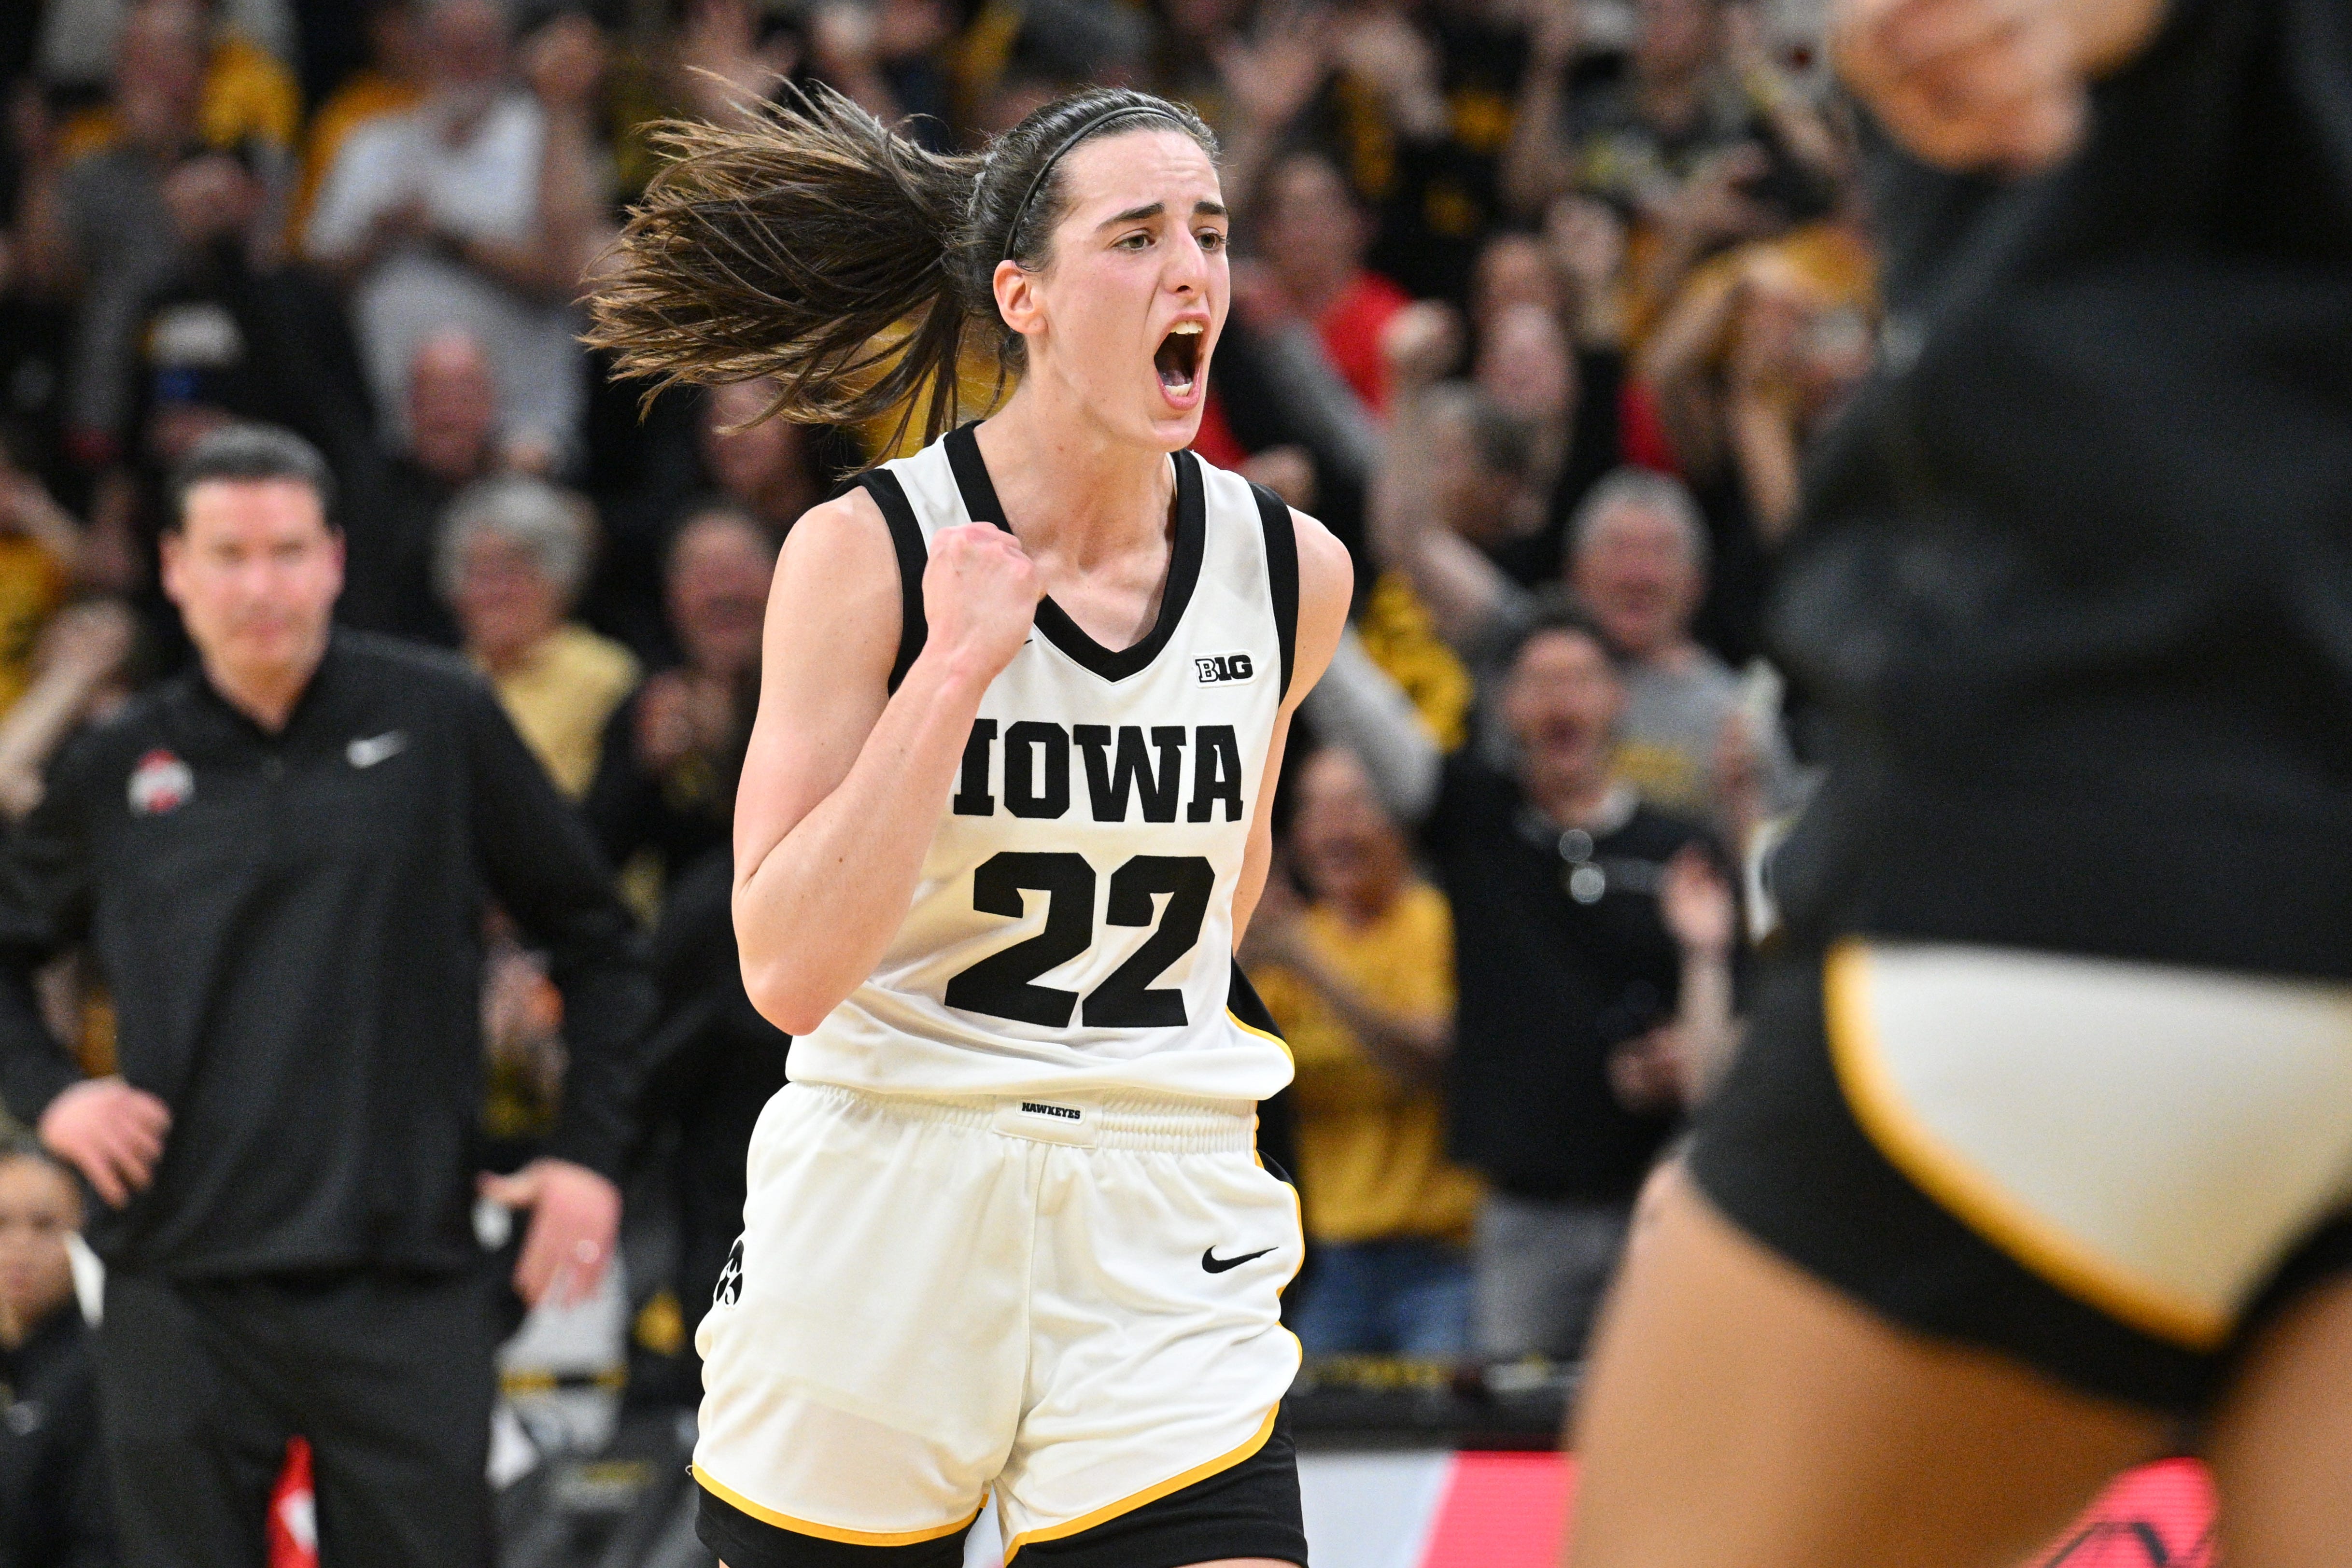 Iowa standout breaks scoring record, sparks reactions from sports world